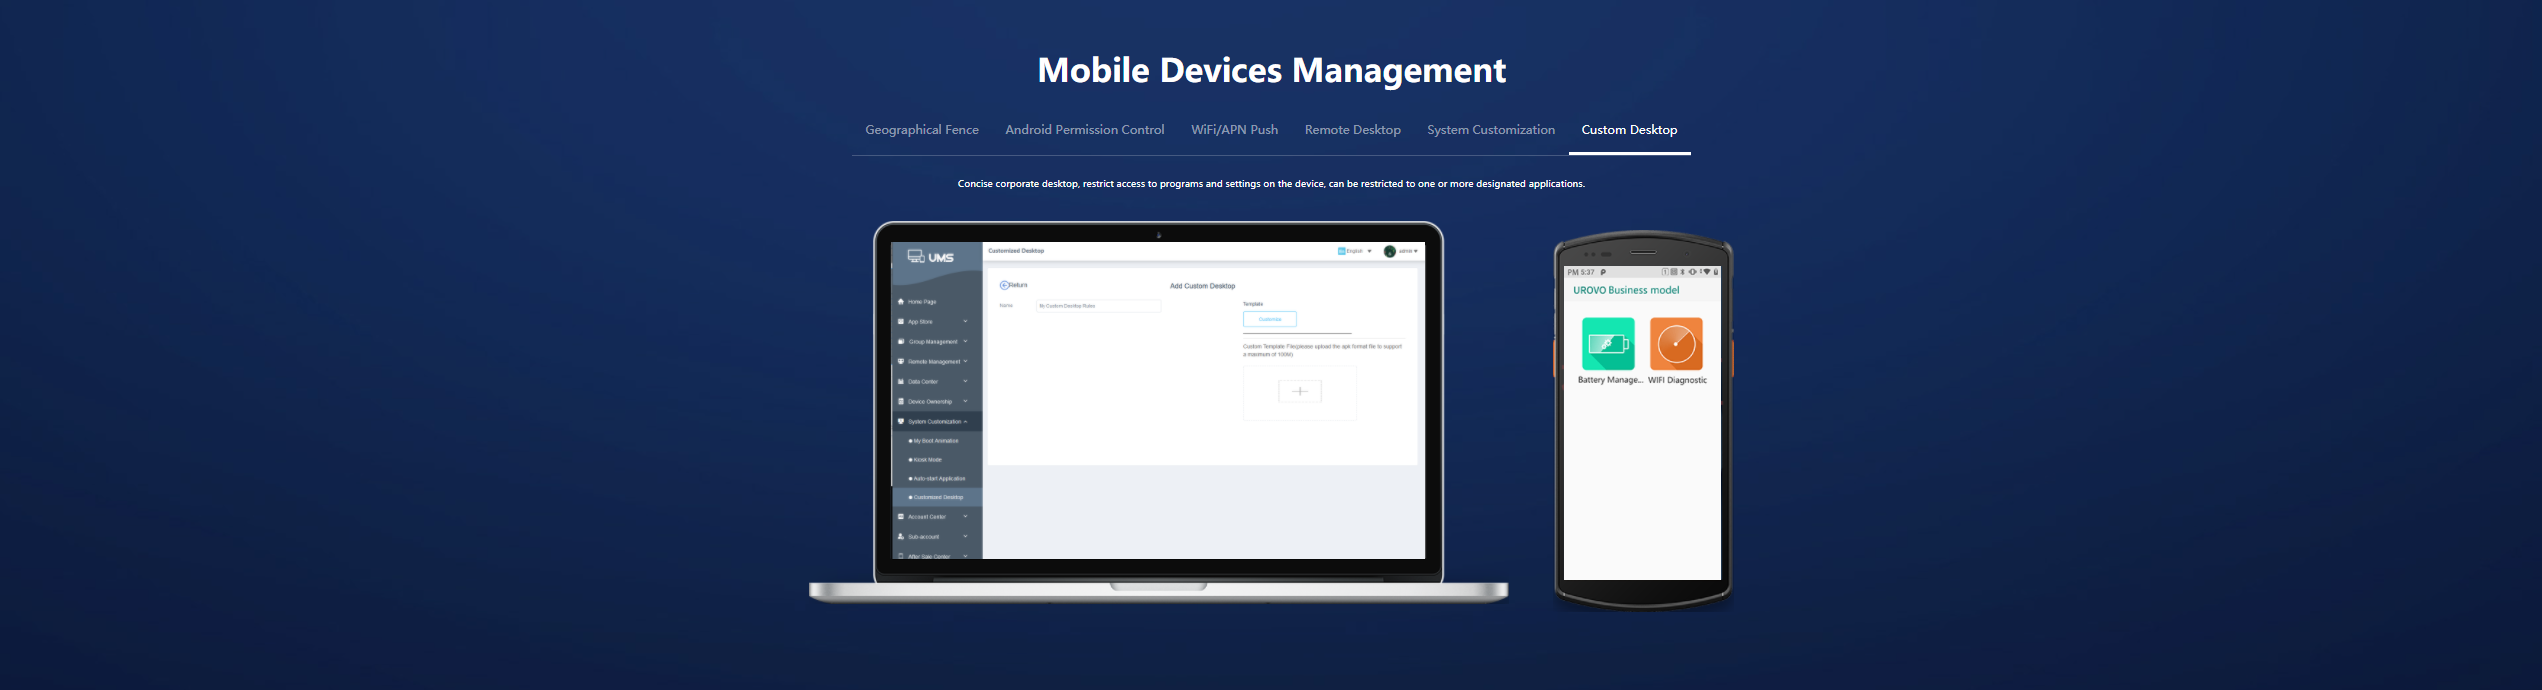 mobile devices management